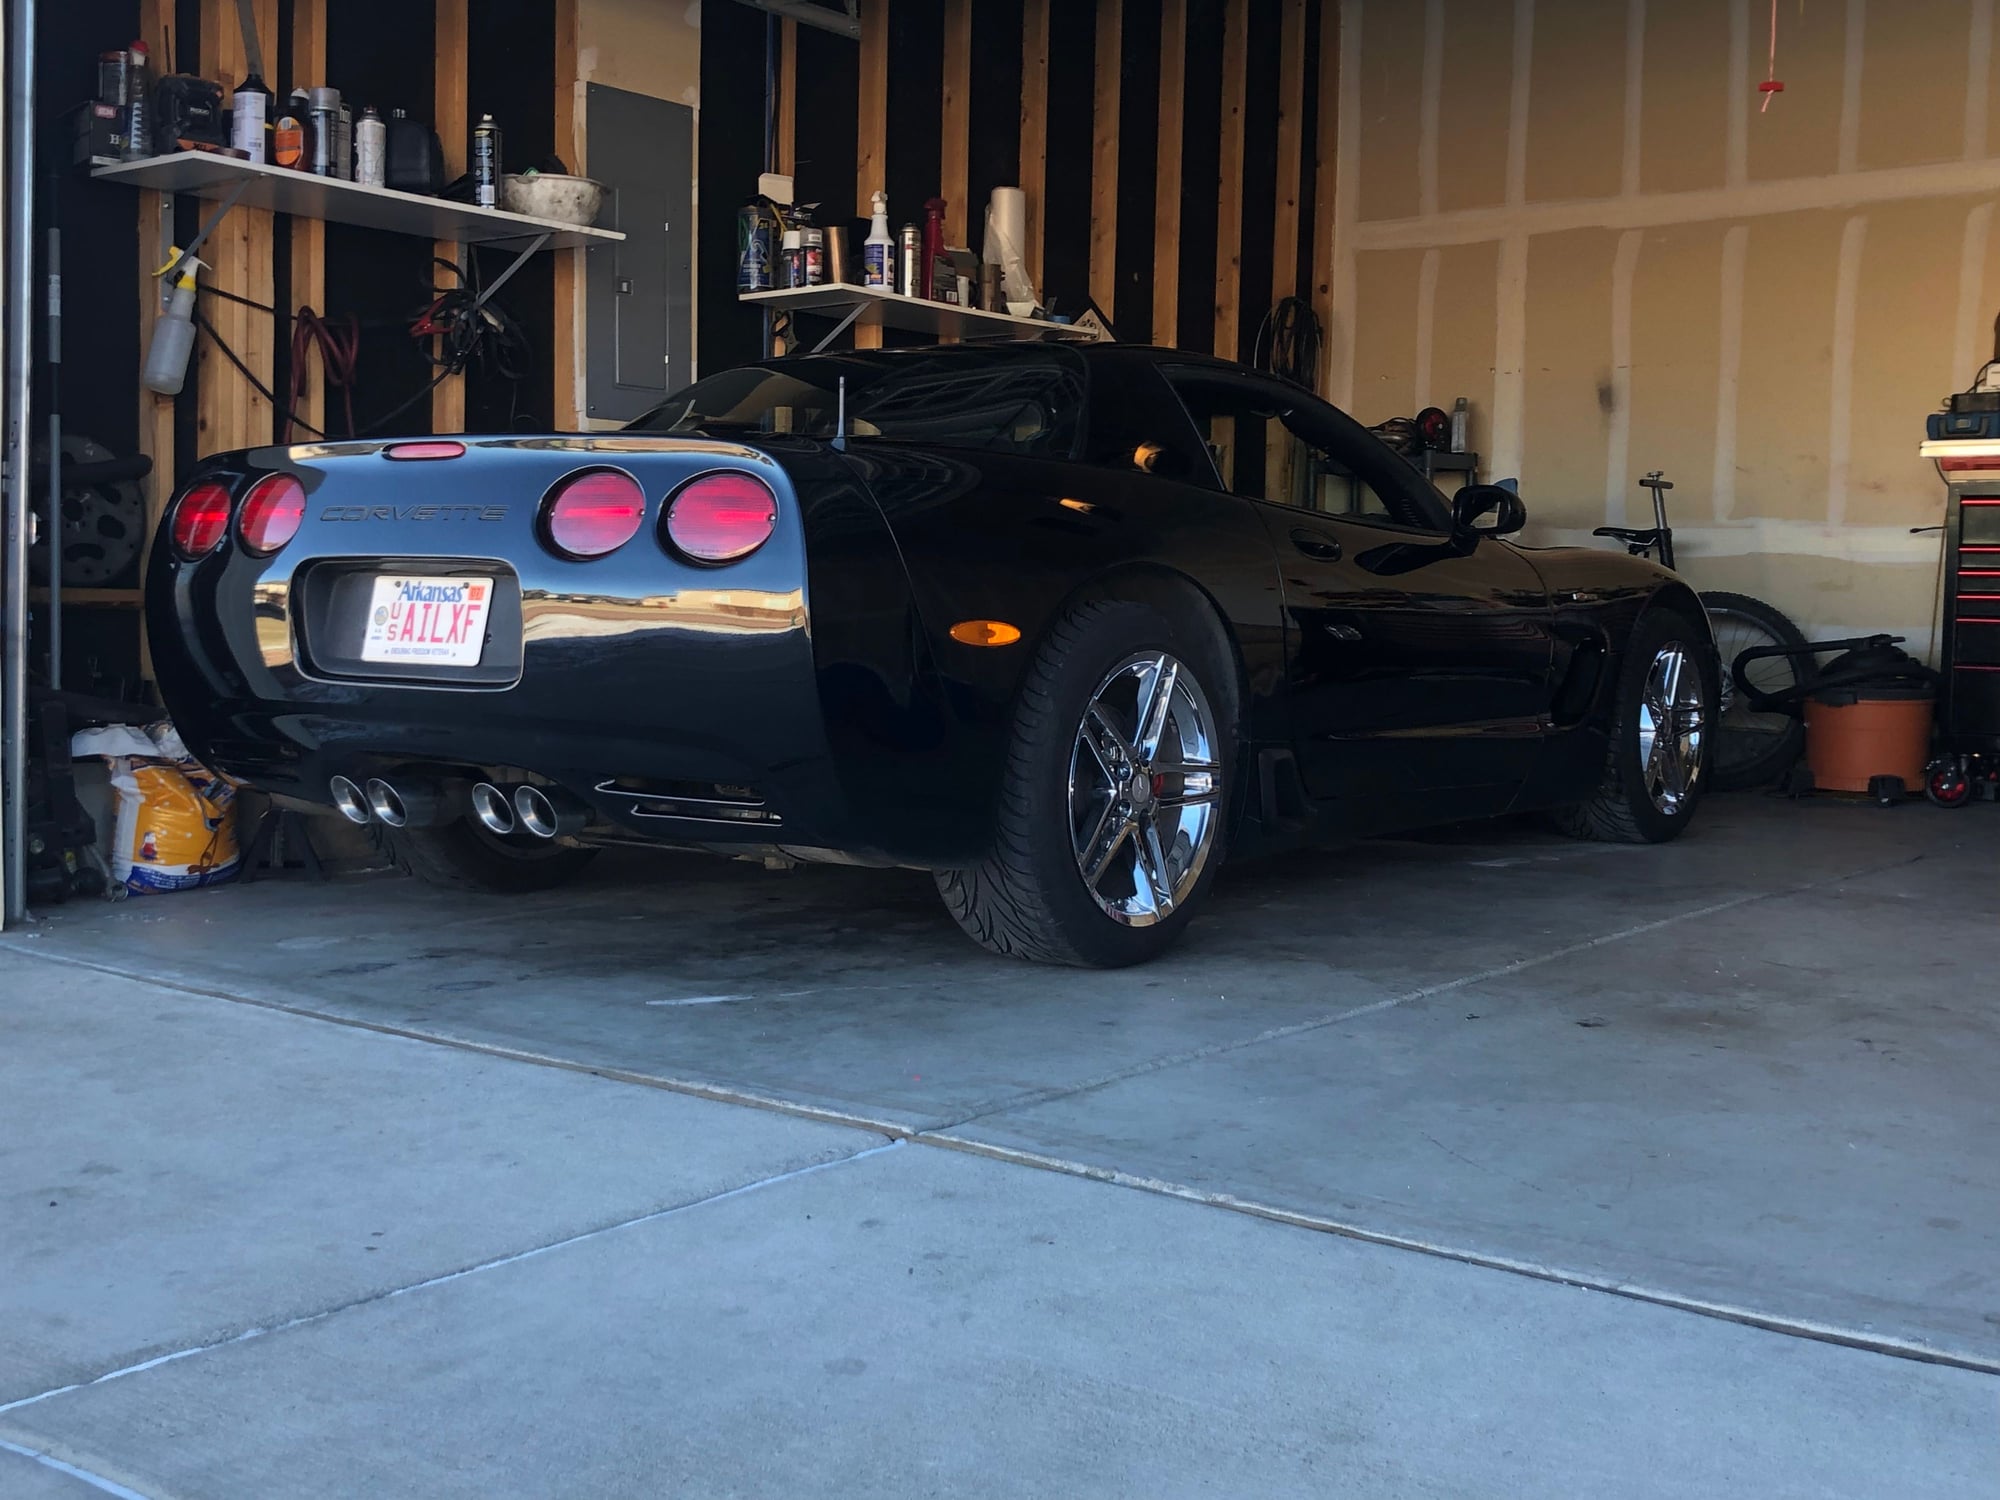 2001 Chevrolet Corvette - 2001 Z06 Corvette - Used - VIN 1G1YY12S315134725 - 8 cyl - 2WD - Automatic - Coupe - Black - Colorado Springs, CO 80925, United States